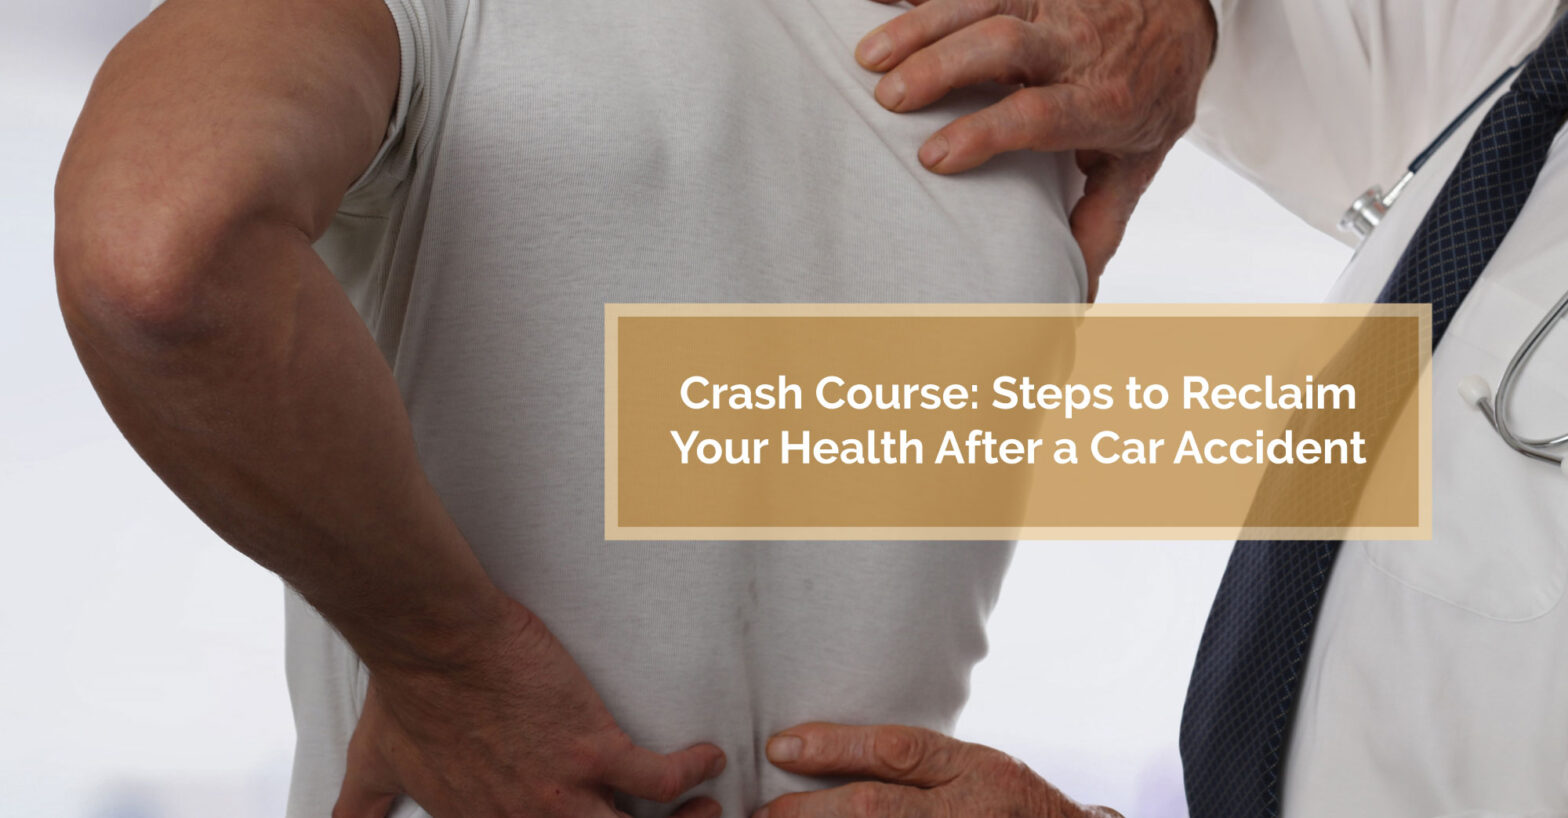 Steps to Reclaim Your Health After a Car Accident